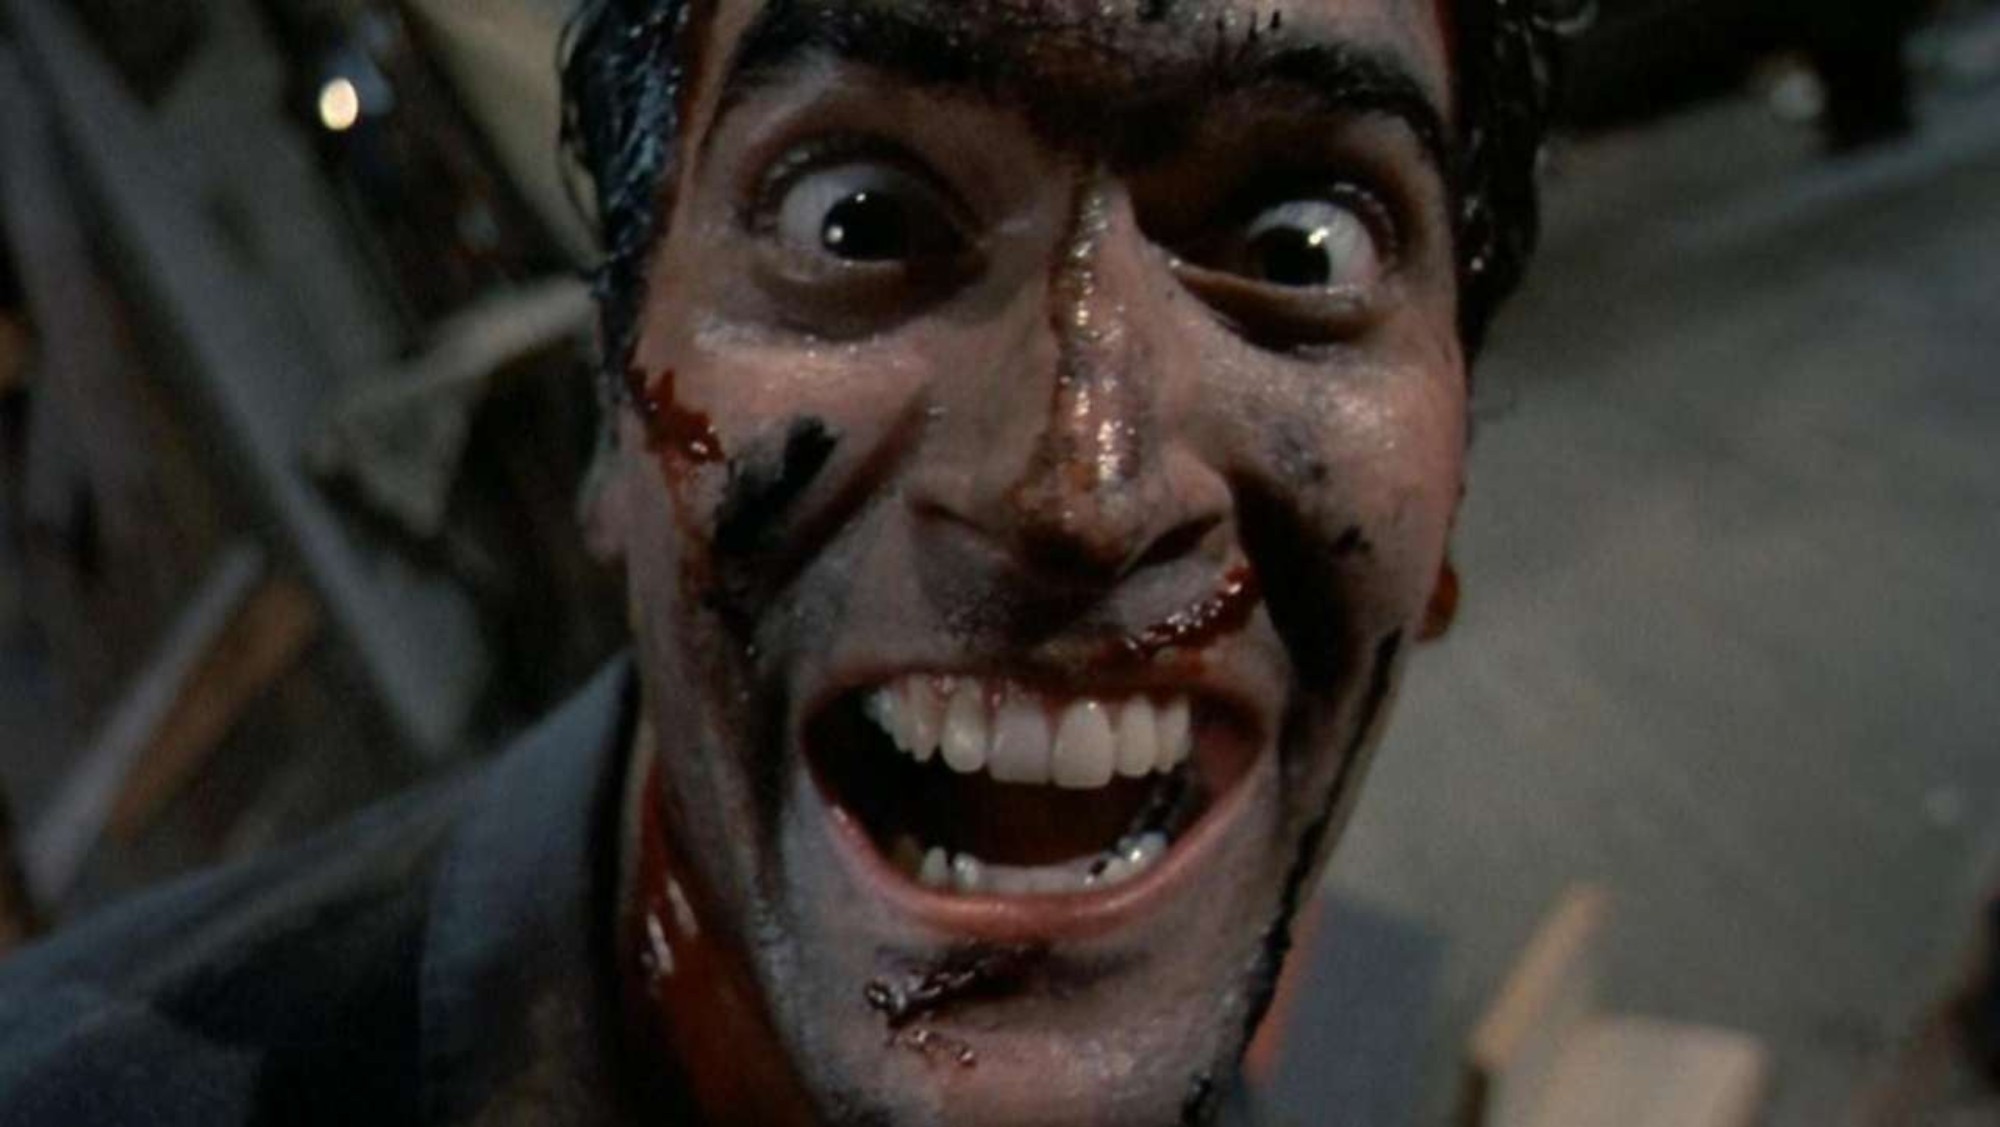 'Evil Dead II' Bruce Campbell as Ash Williams looking into the camera with his mouth open, and blood on his face.